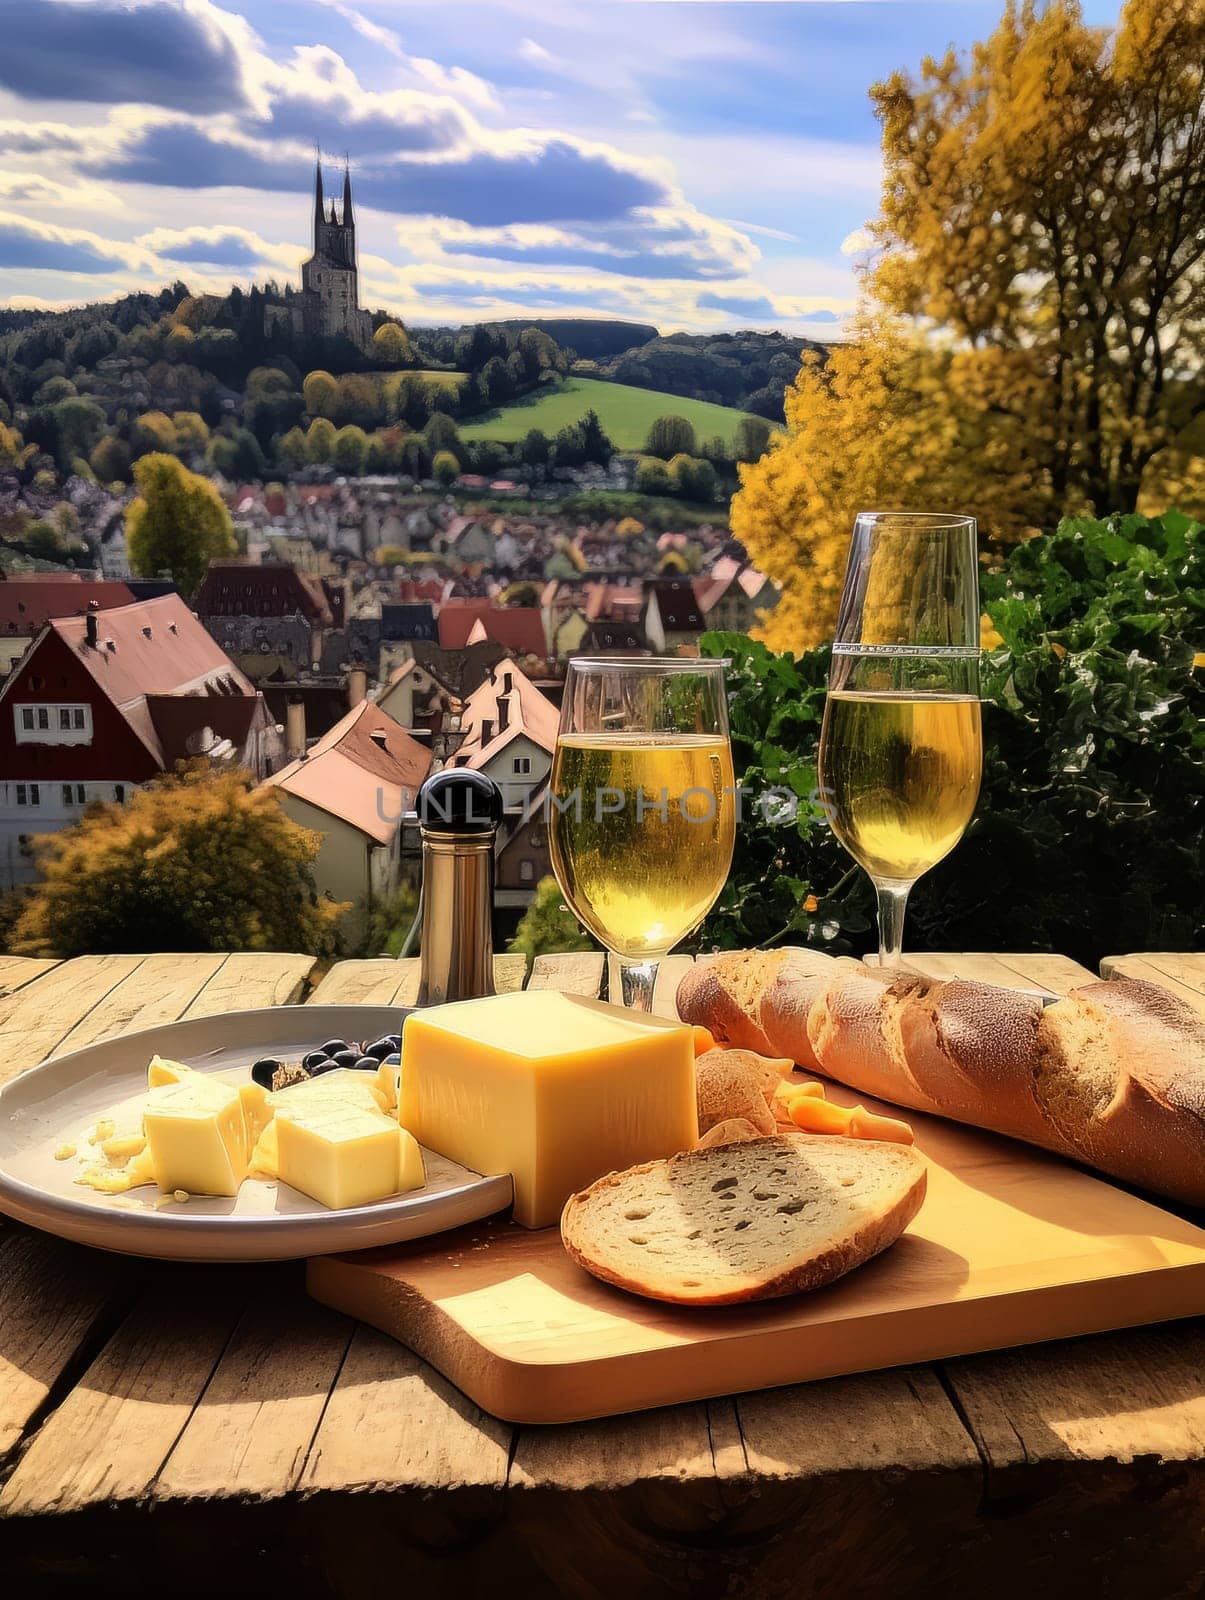 Board with cheeses, bread and white wine in two glasses. Still life of table for tasting cheese and wine, cozy romantic atmosphere, outdoor village panorama on a warm sunny day AI